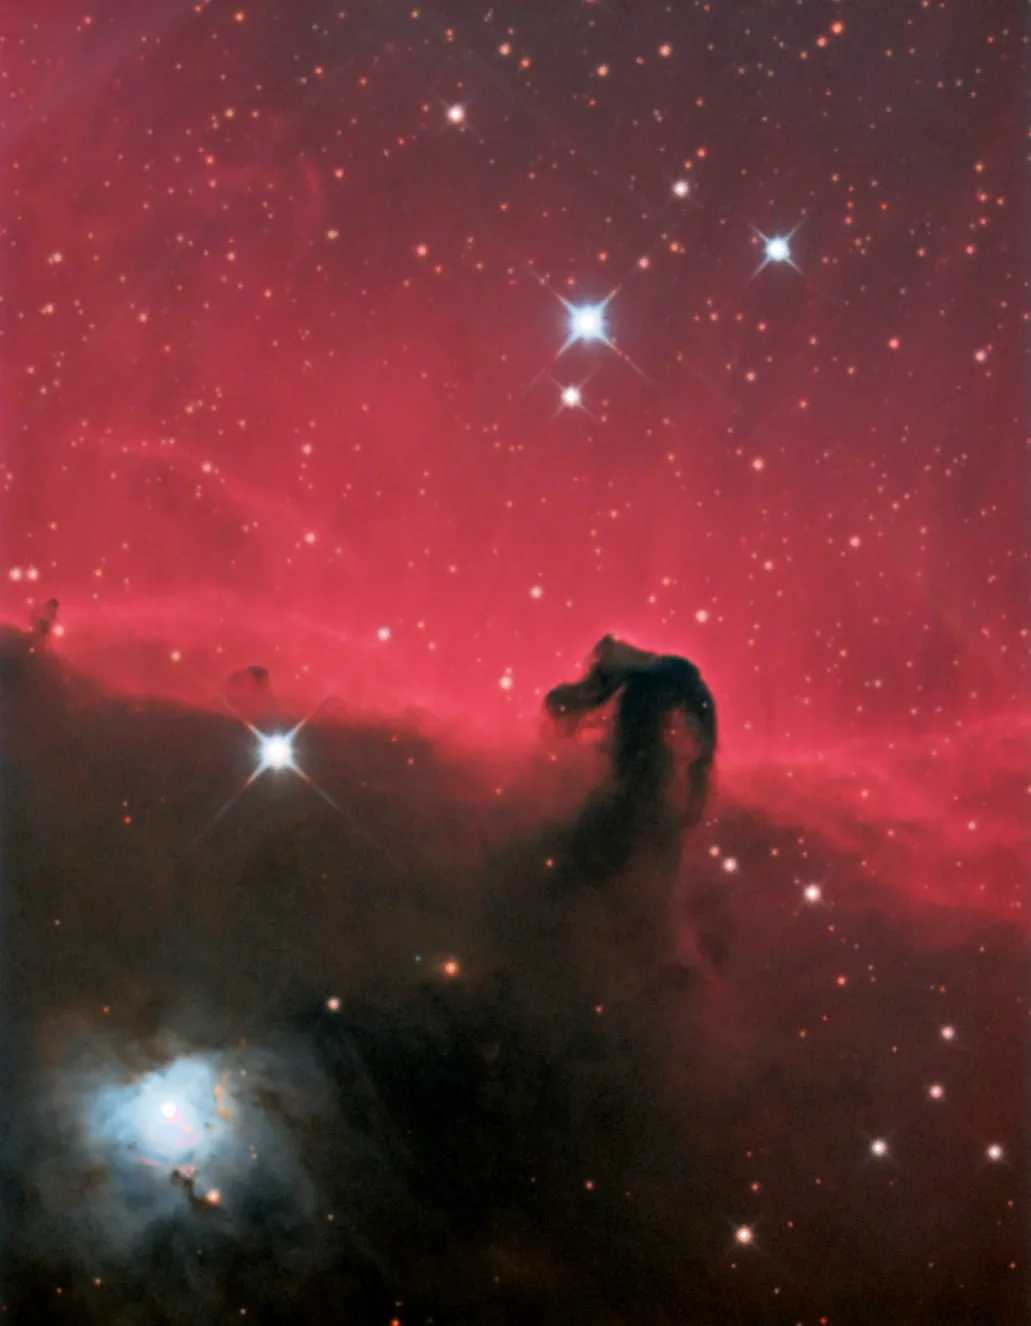 Horsehead Nebula and IC2023 by Neil Isaac, Neath, South Wales, UK. Equipment: Orion Optics 200mm f4.5 refrlector, Starlight Xpress SXV-H9 mono CCD with LRDB filters, 90mm guidescope with QHY5 camera, NEQ6 mount